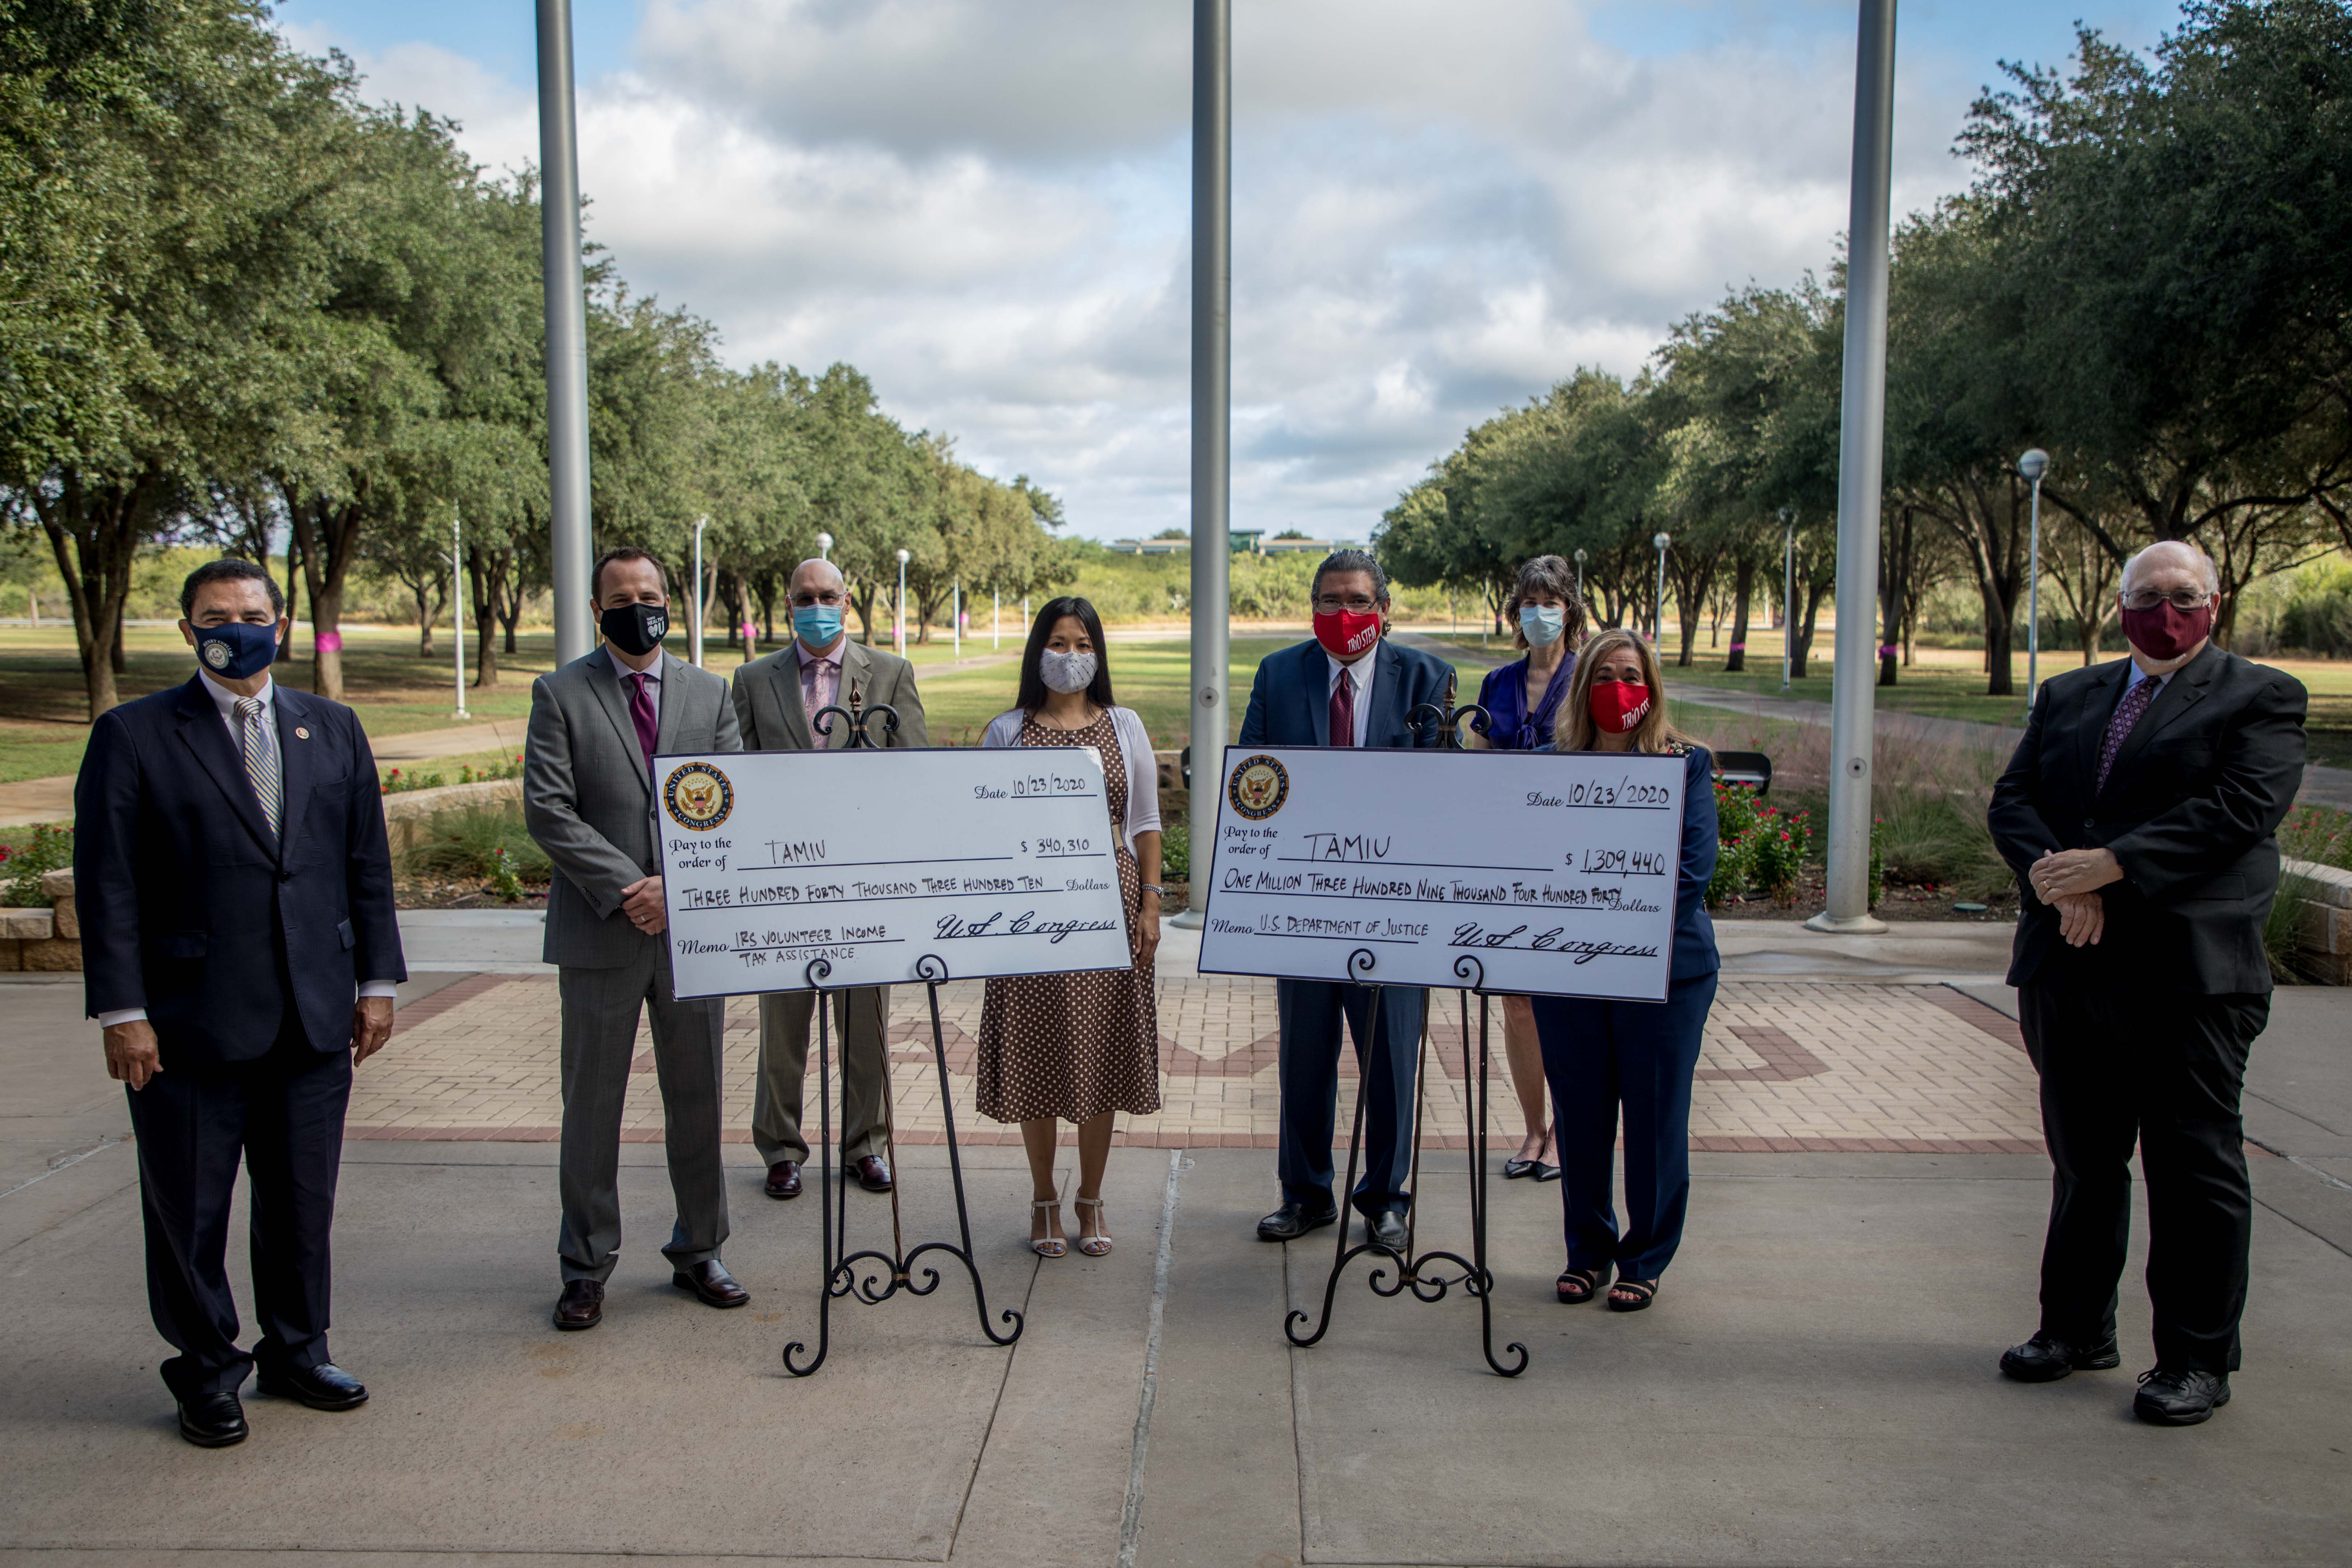 Federal funding announced at TAMIU will help support student services, as well as provide income tax assistance for Webb County residents. Pictured, from left to right, is: Congressman Rep. Henry Cuellar; Dr. Jack Byham, assistant professor of Political Science; Dr. John Kilburn, associate vice president for Research and Sponsored Projects; Dr. Barbara Hong, dean, University College; Dr. Gustavo Salazar, TRIO program director; Anne Frey, associate director of Grant Development; Leticia Cruz, director of Student Support Services; and Dr. Pablo Arenaz, University president. 